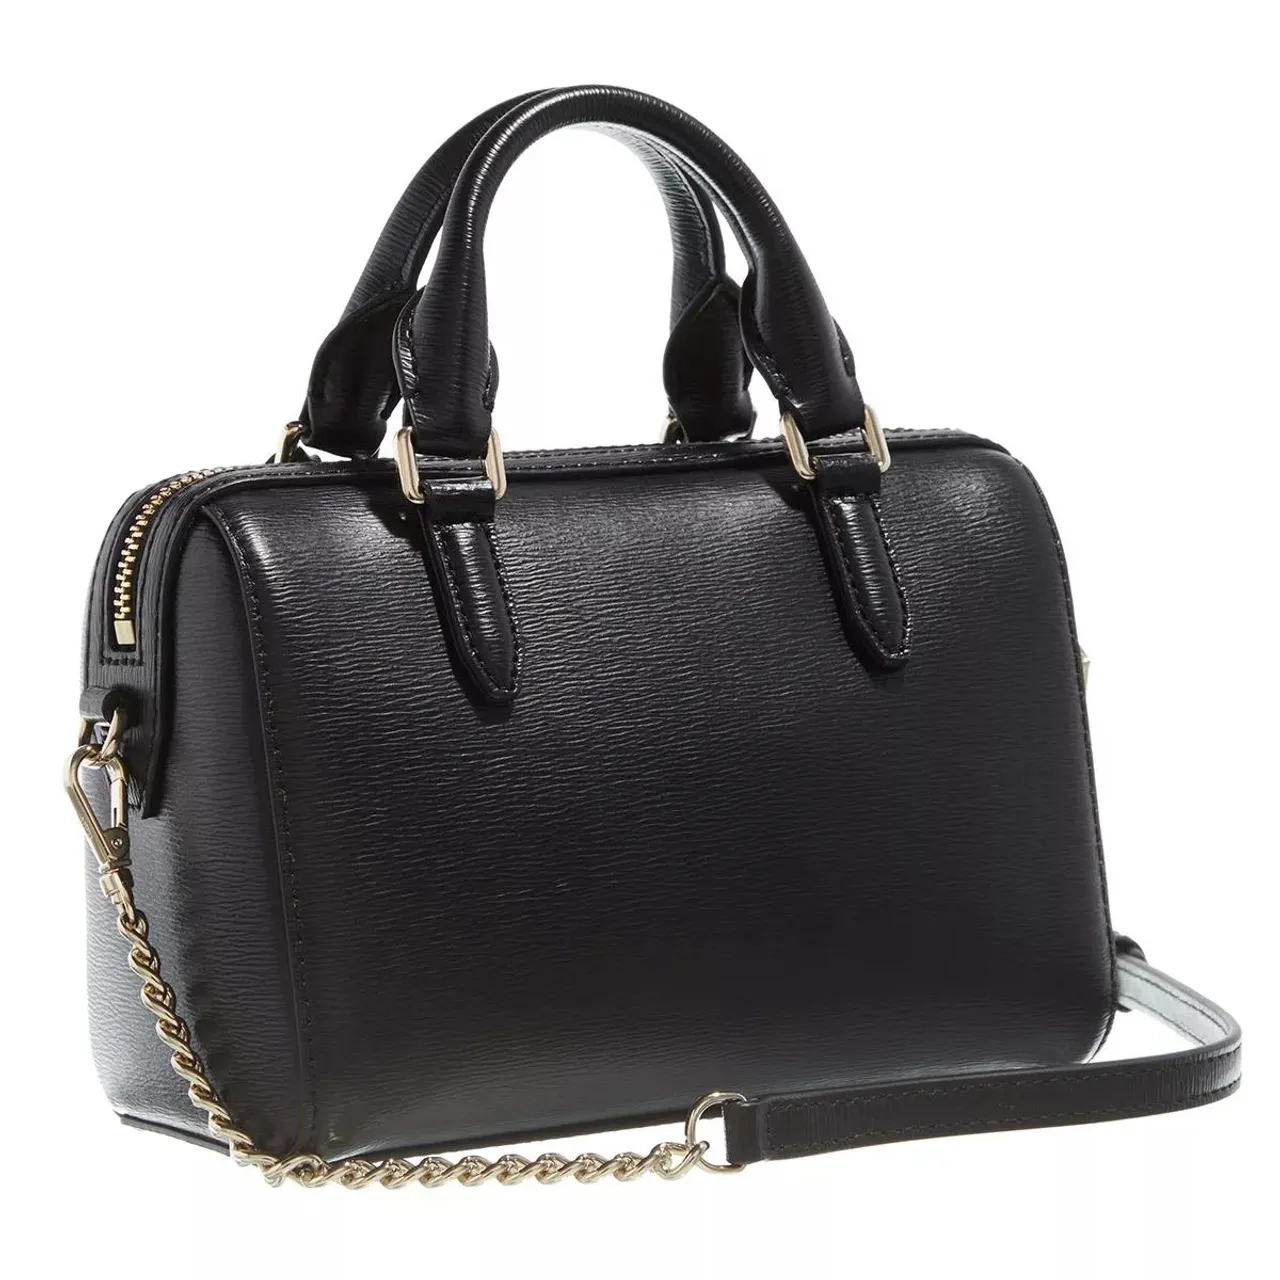 DKNY Travel Bags - Paige - black - Travel Bags for ladies